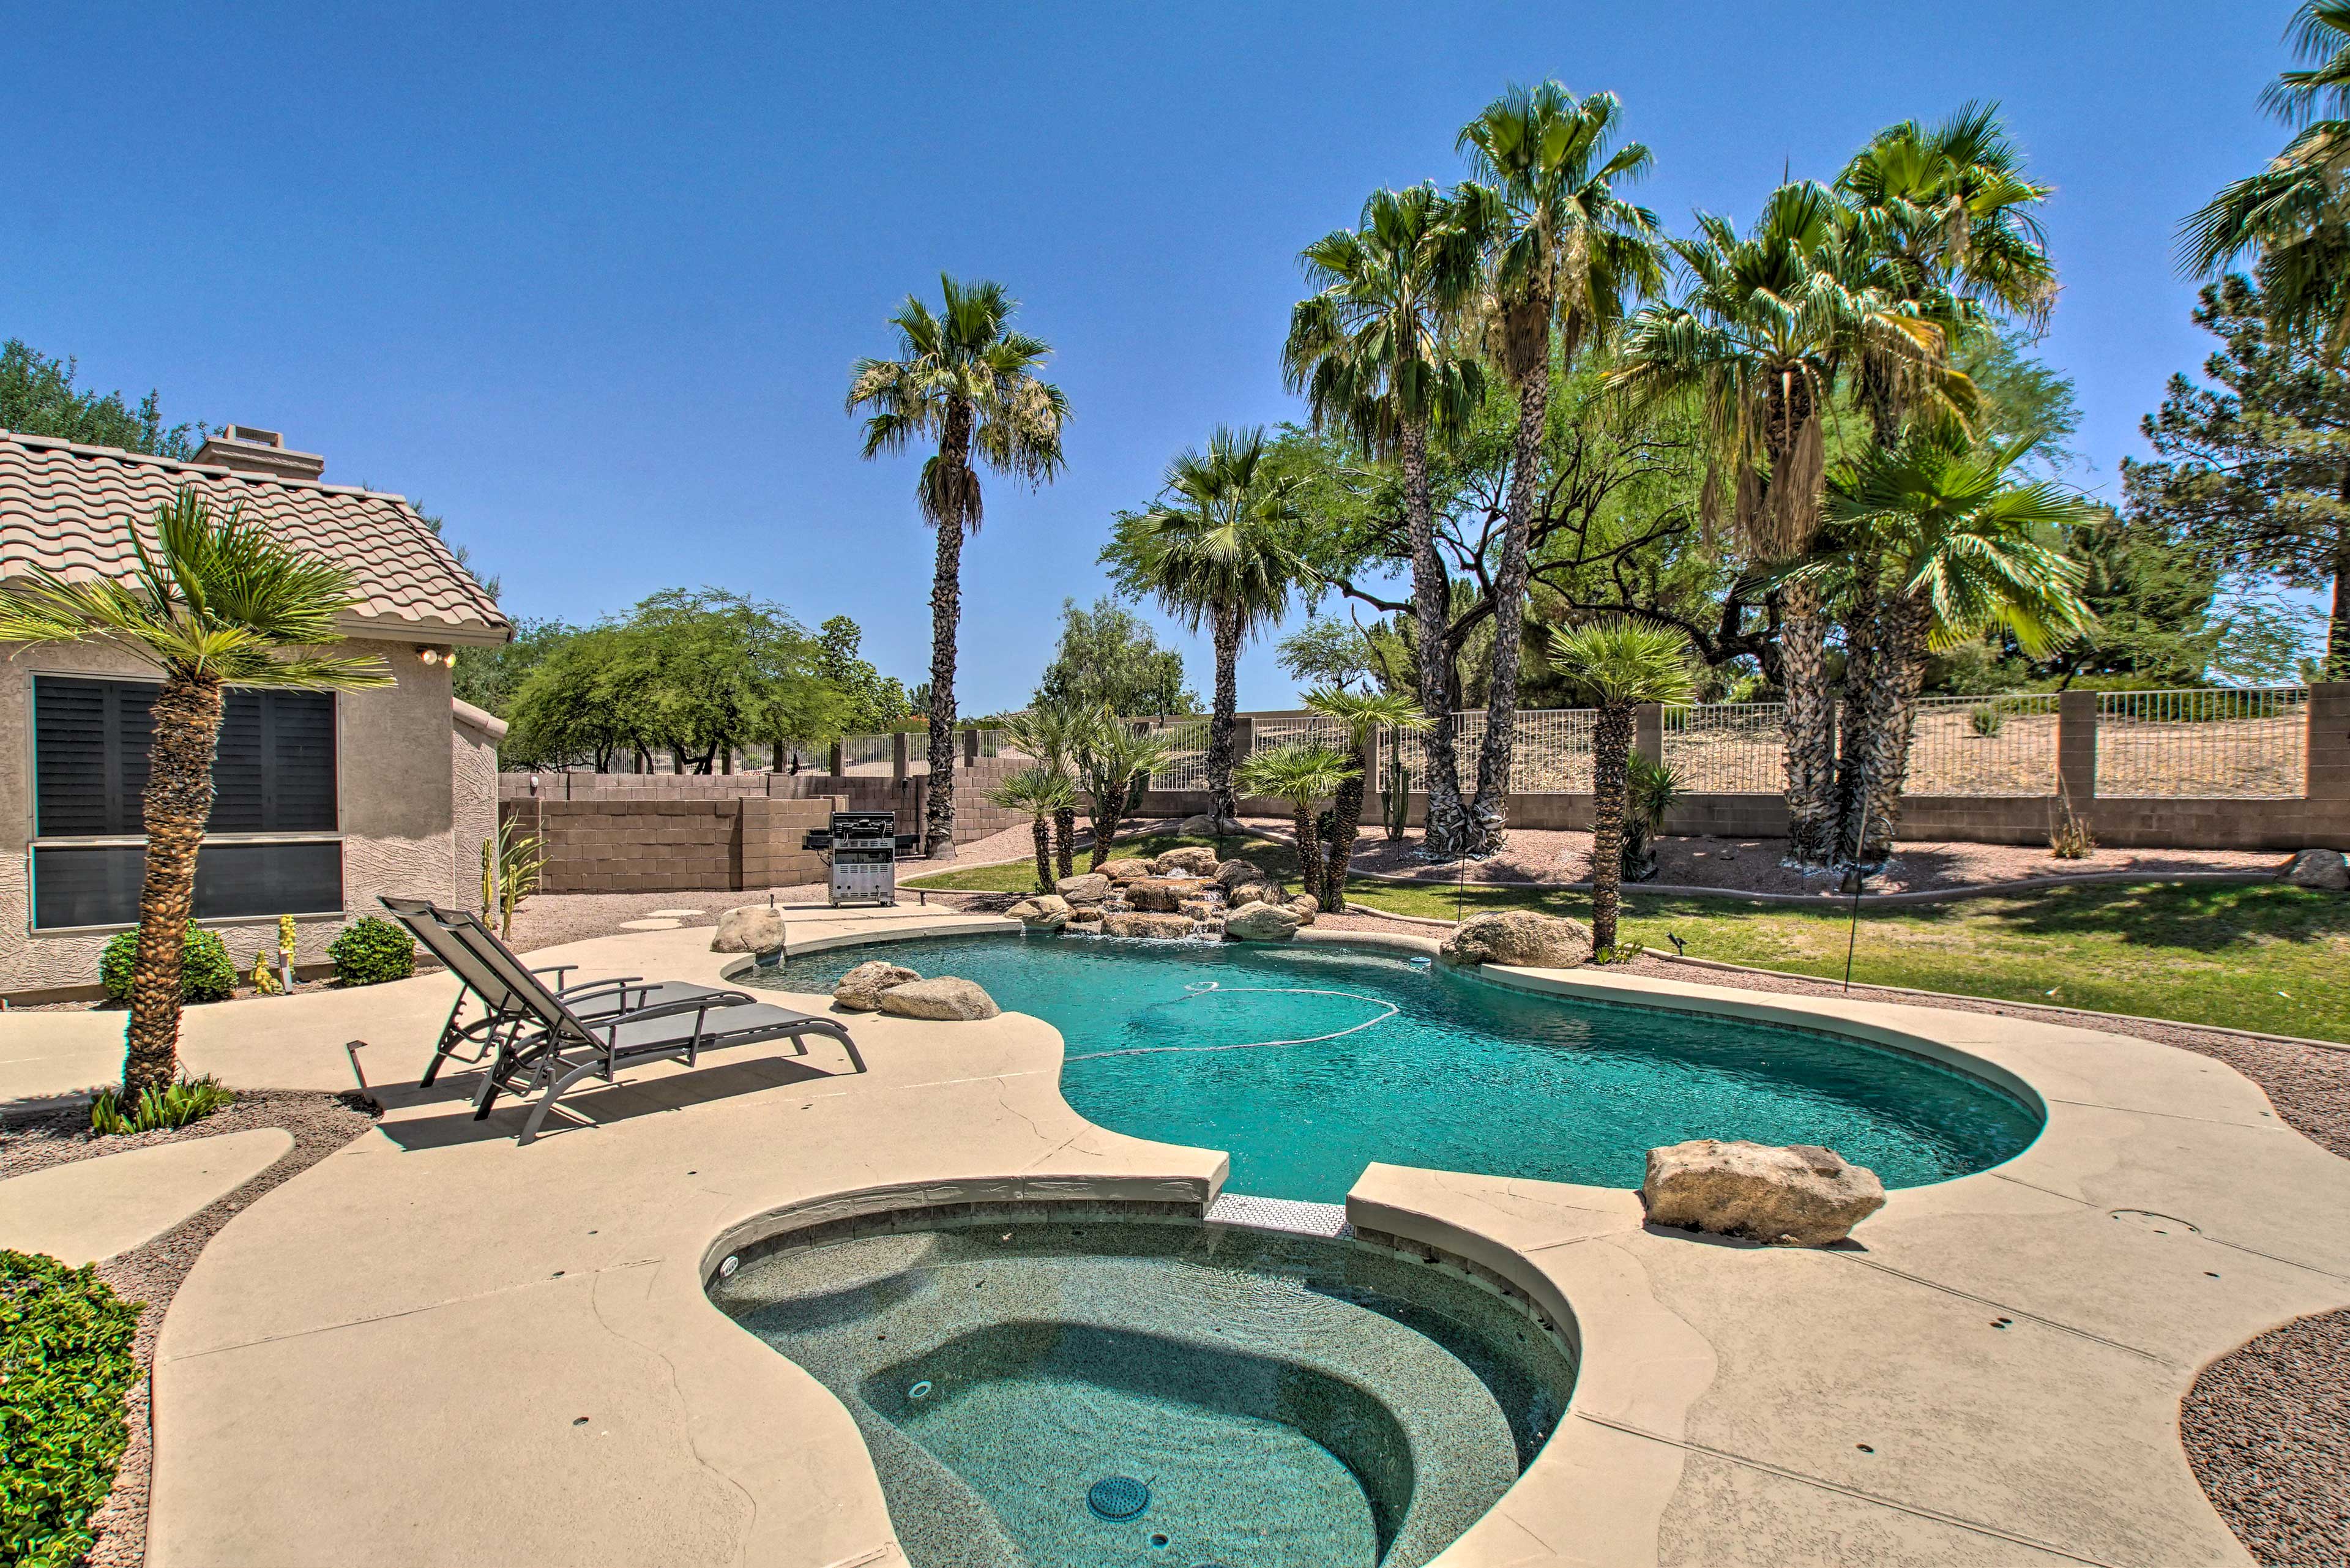 Ideally Located Chandler Home: Backyard Oasis